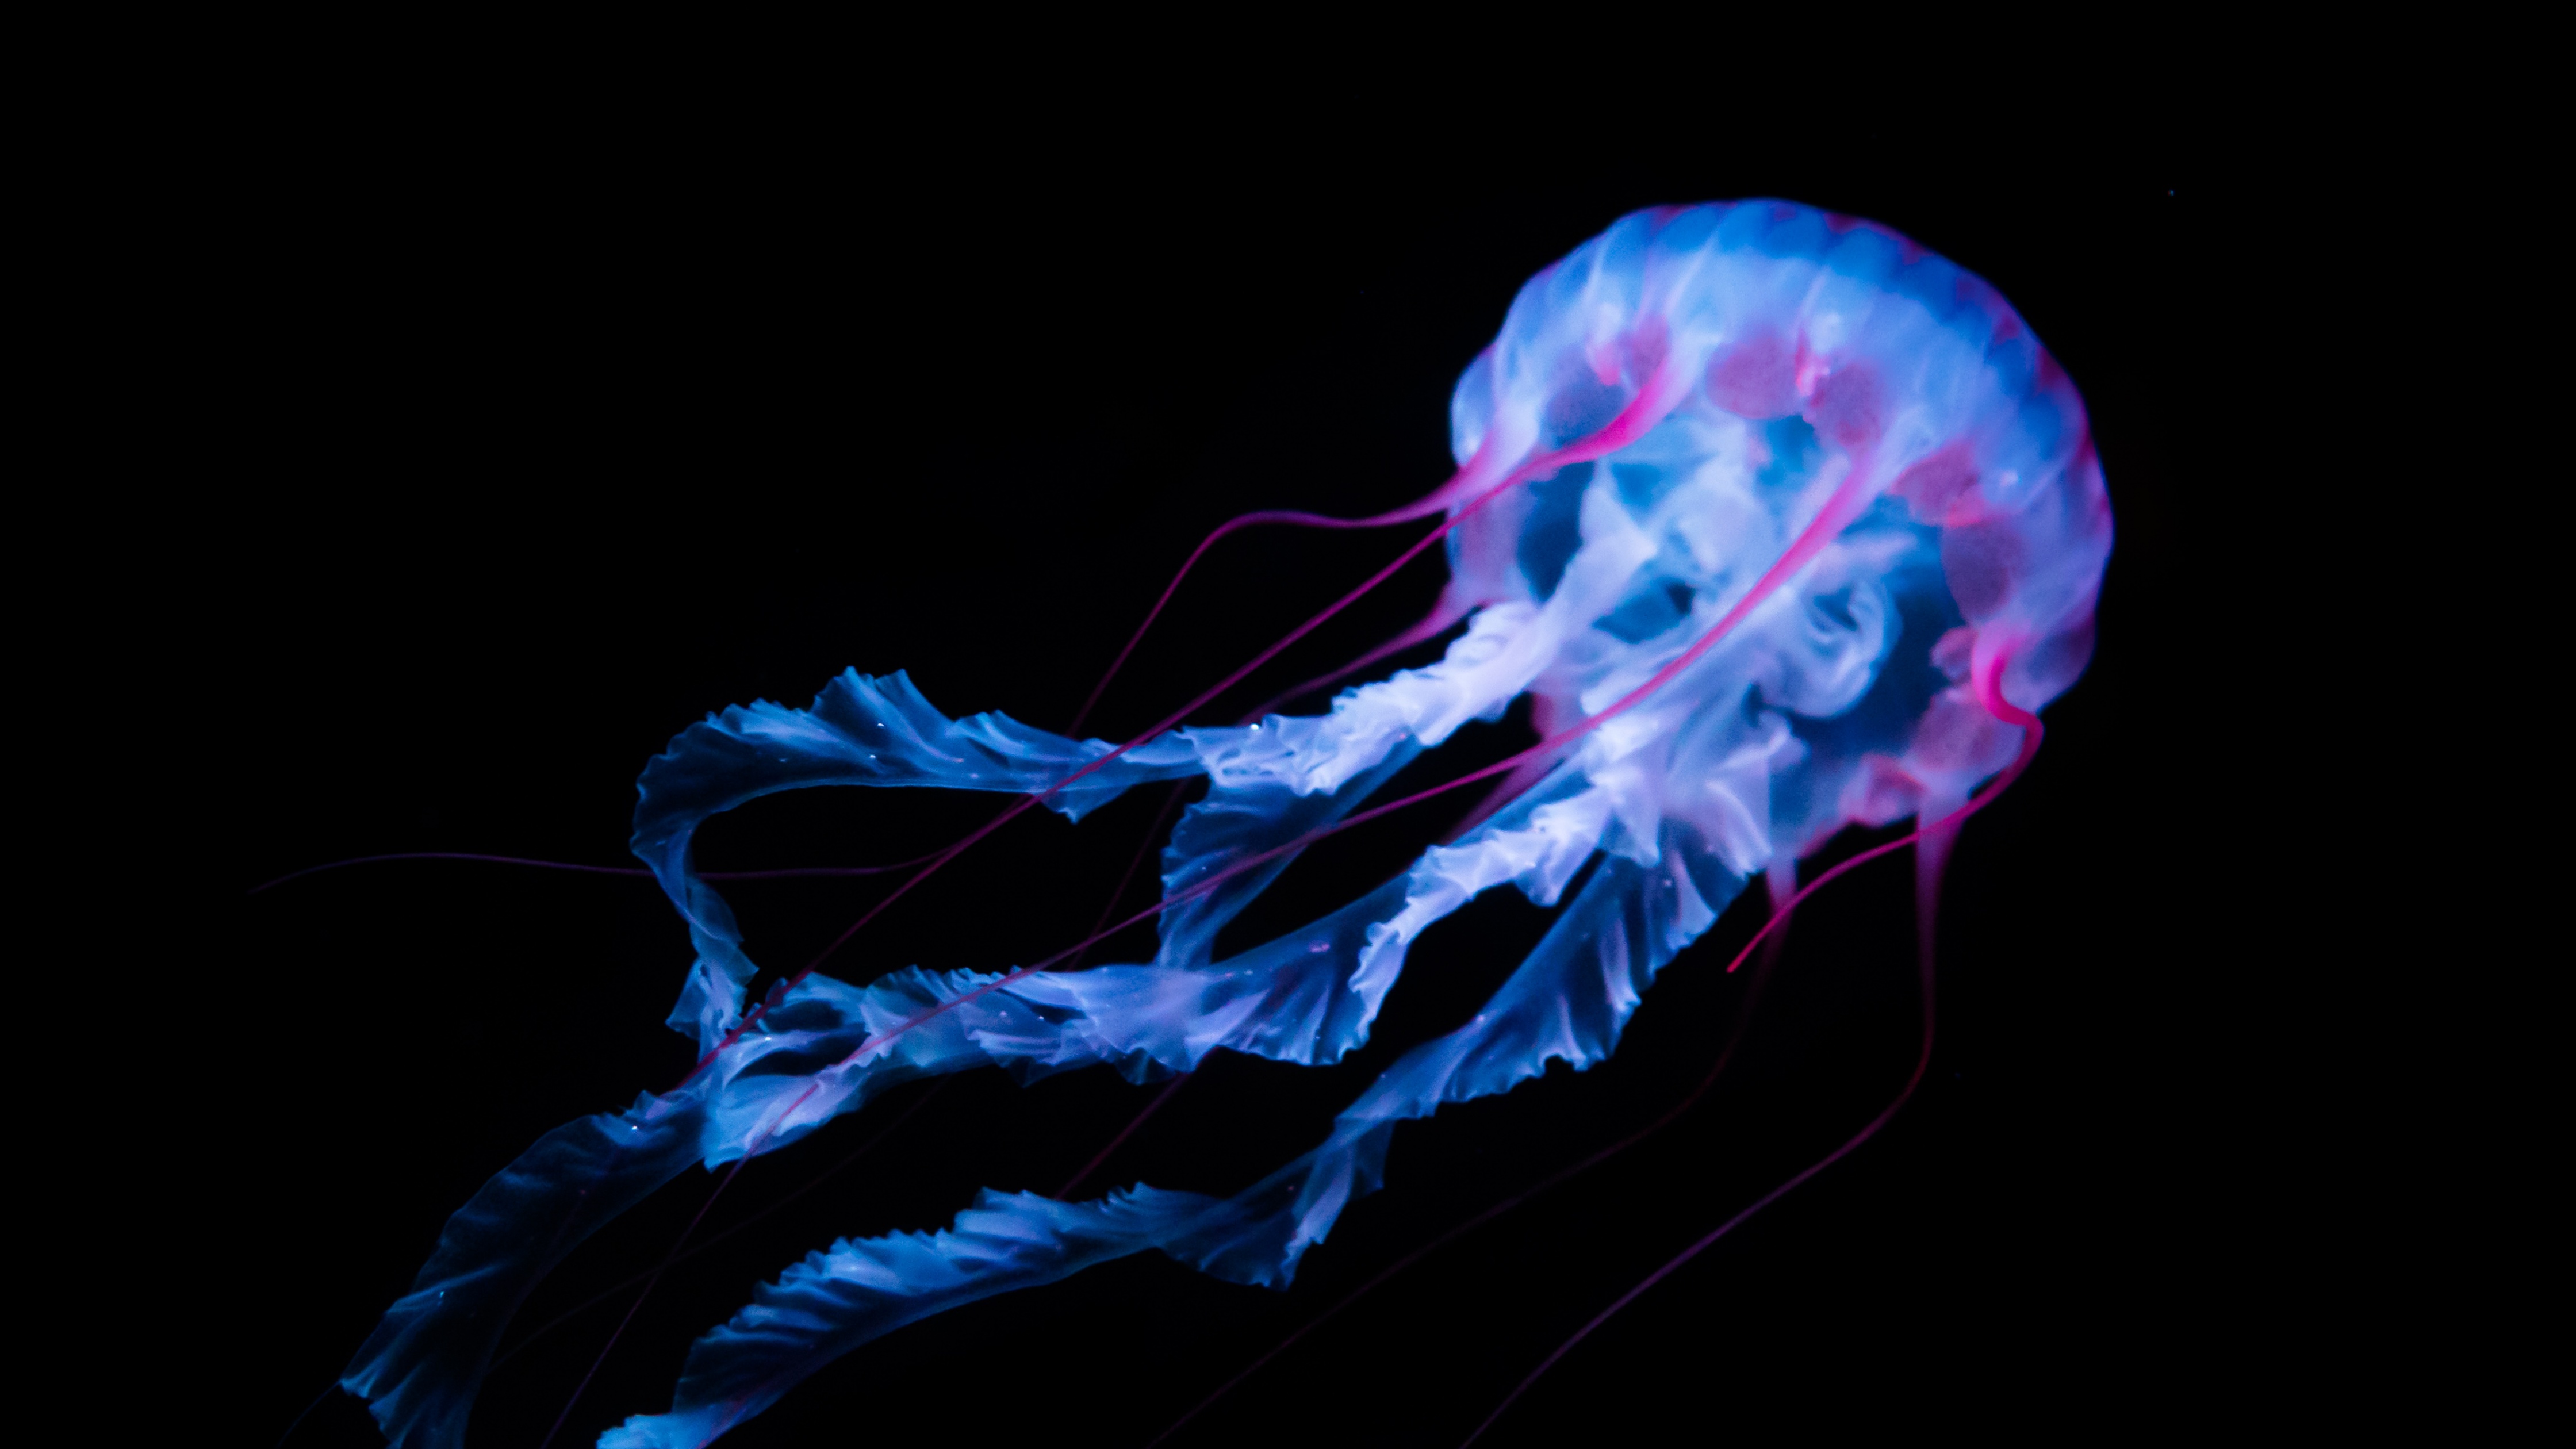 Jellyfish Photos Download The BEST Free Jellyfish Stock Photos  HD Images